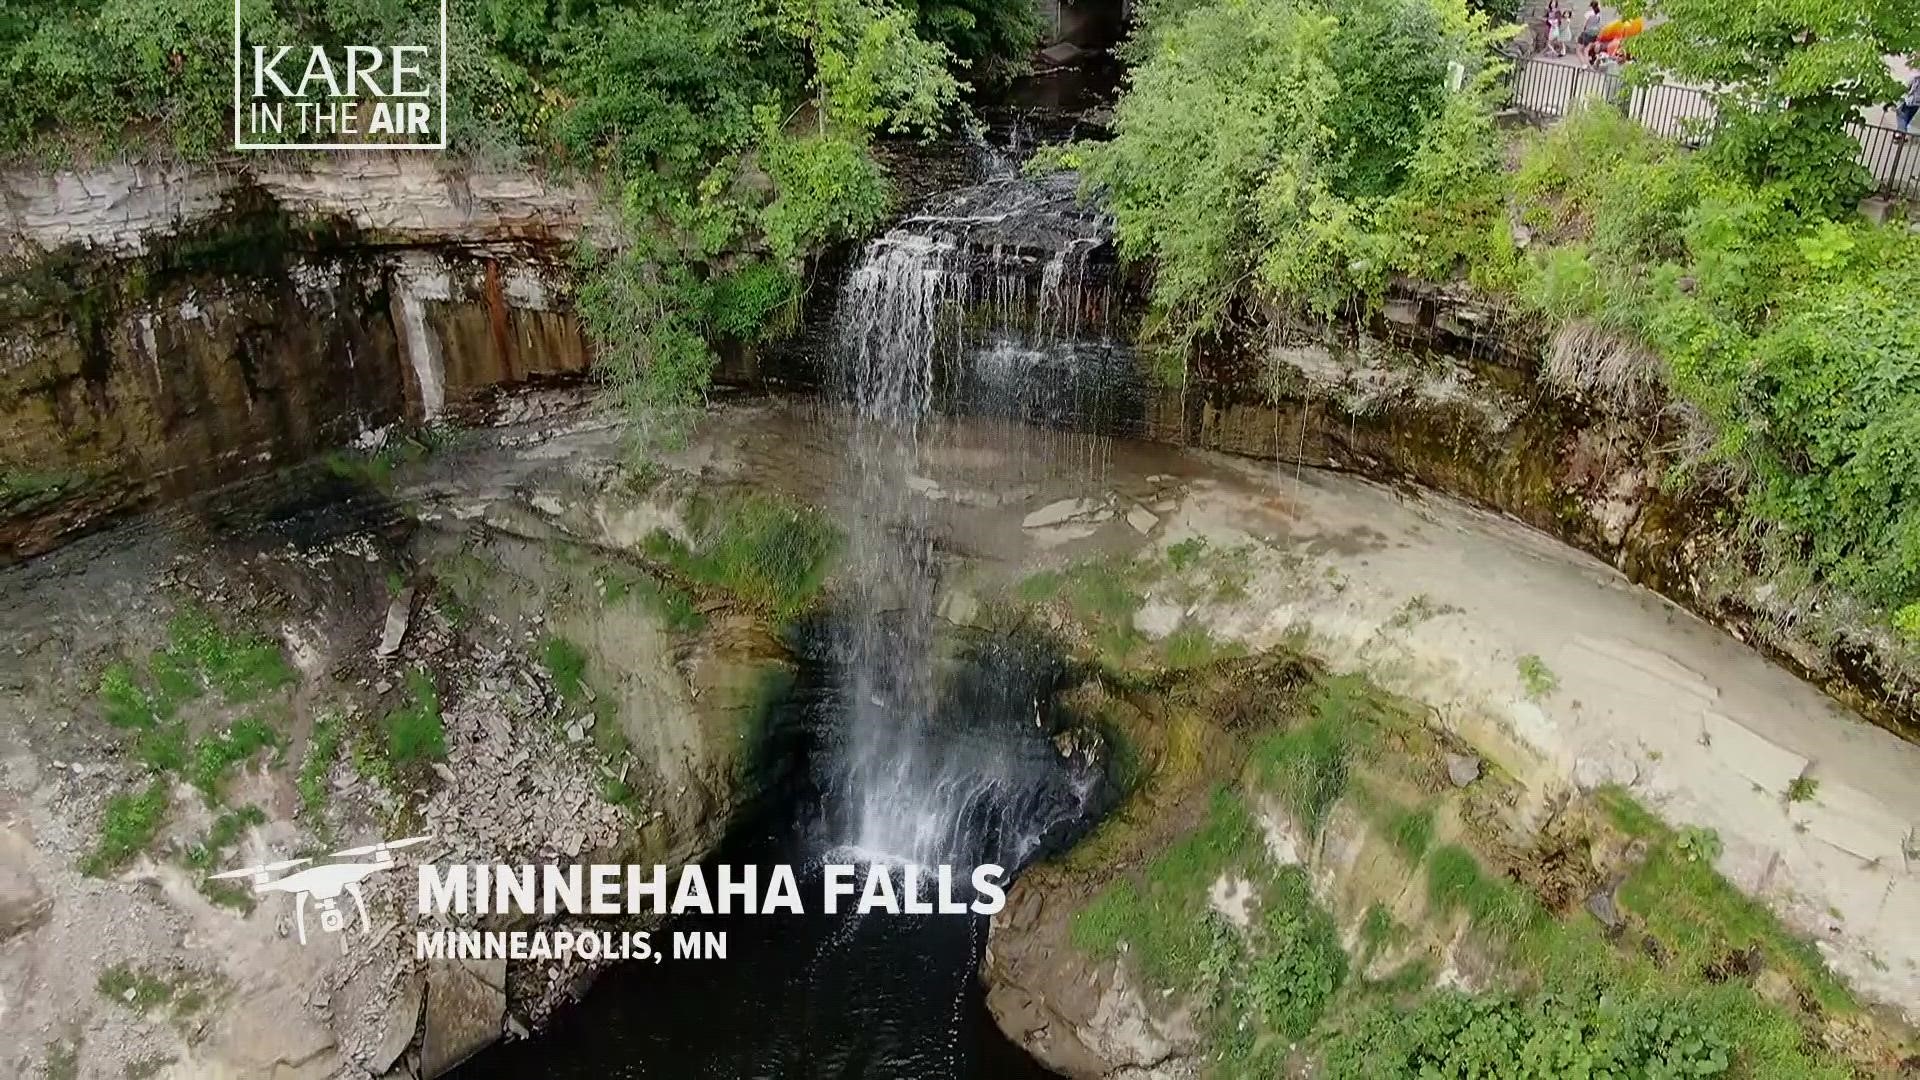 The latest installment of our ongoing drone series takes us over the famous Minneapolis waterfall, which has a different look due to the ongoing drought.